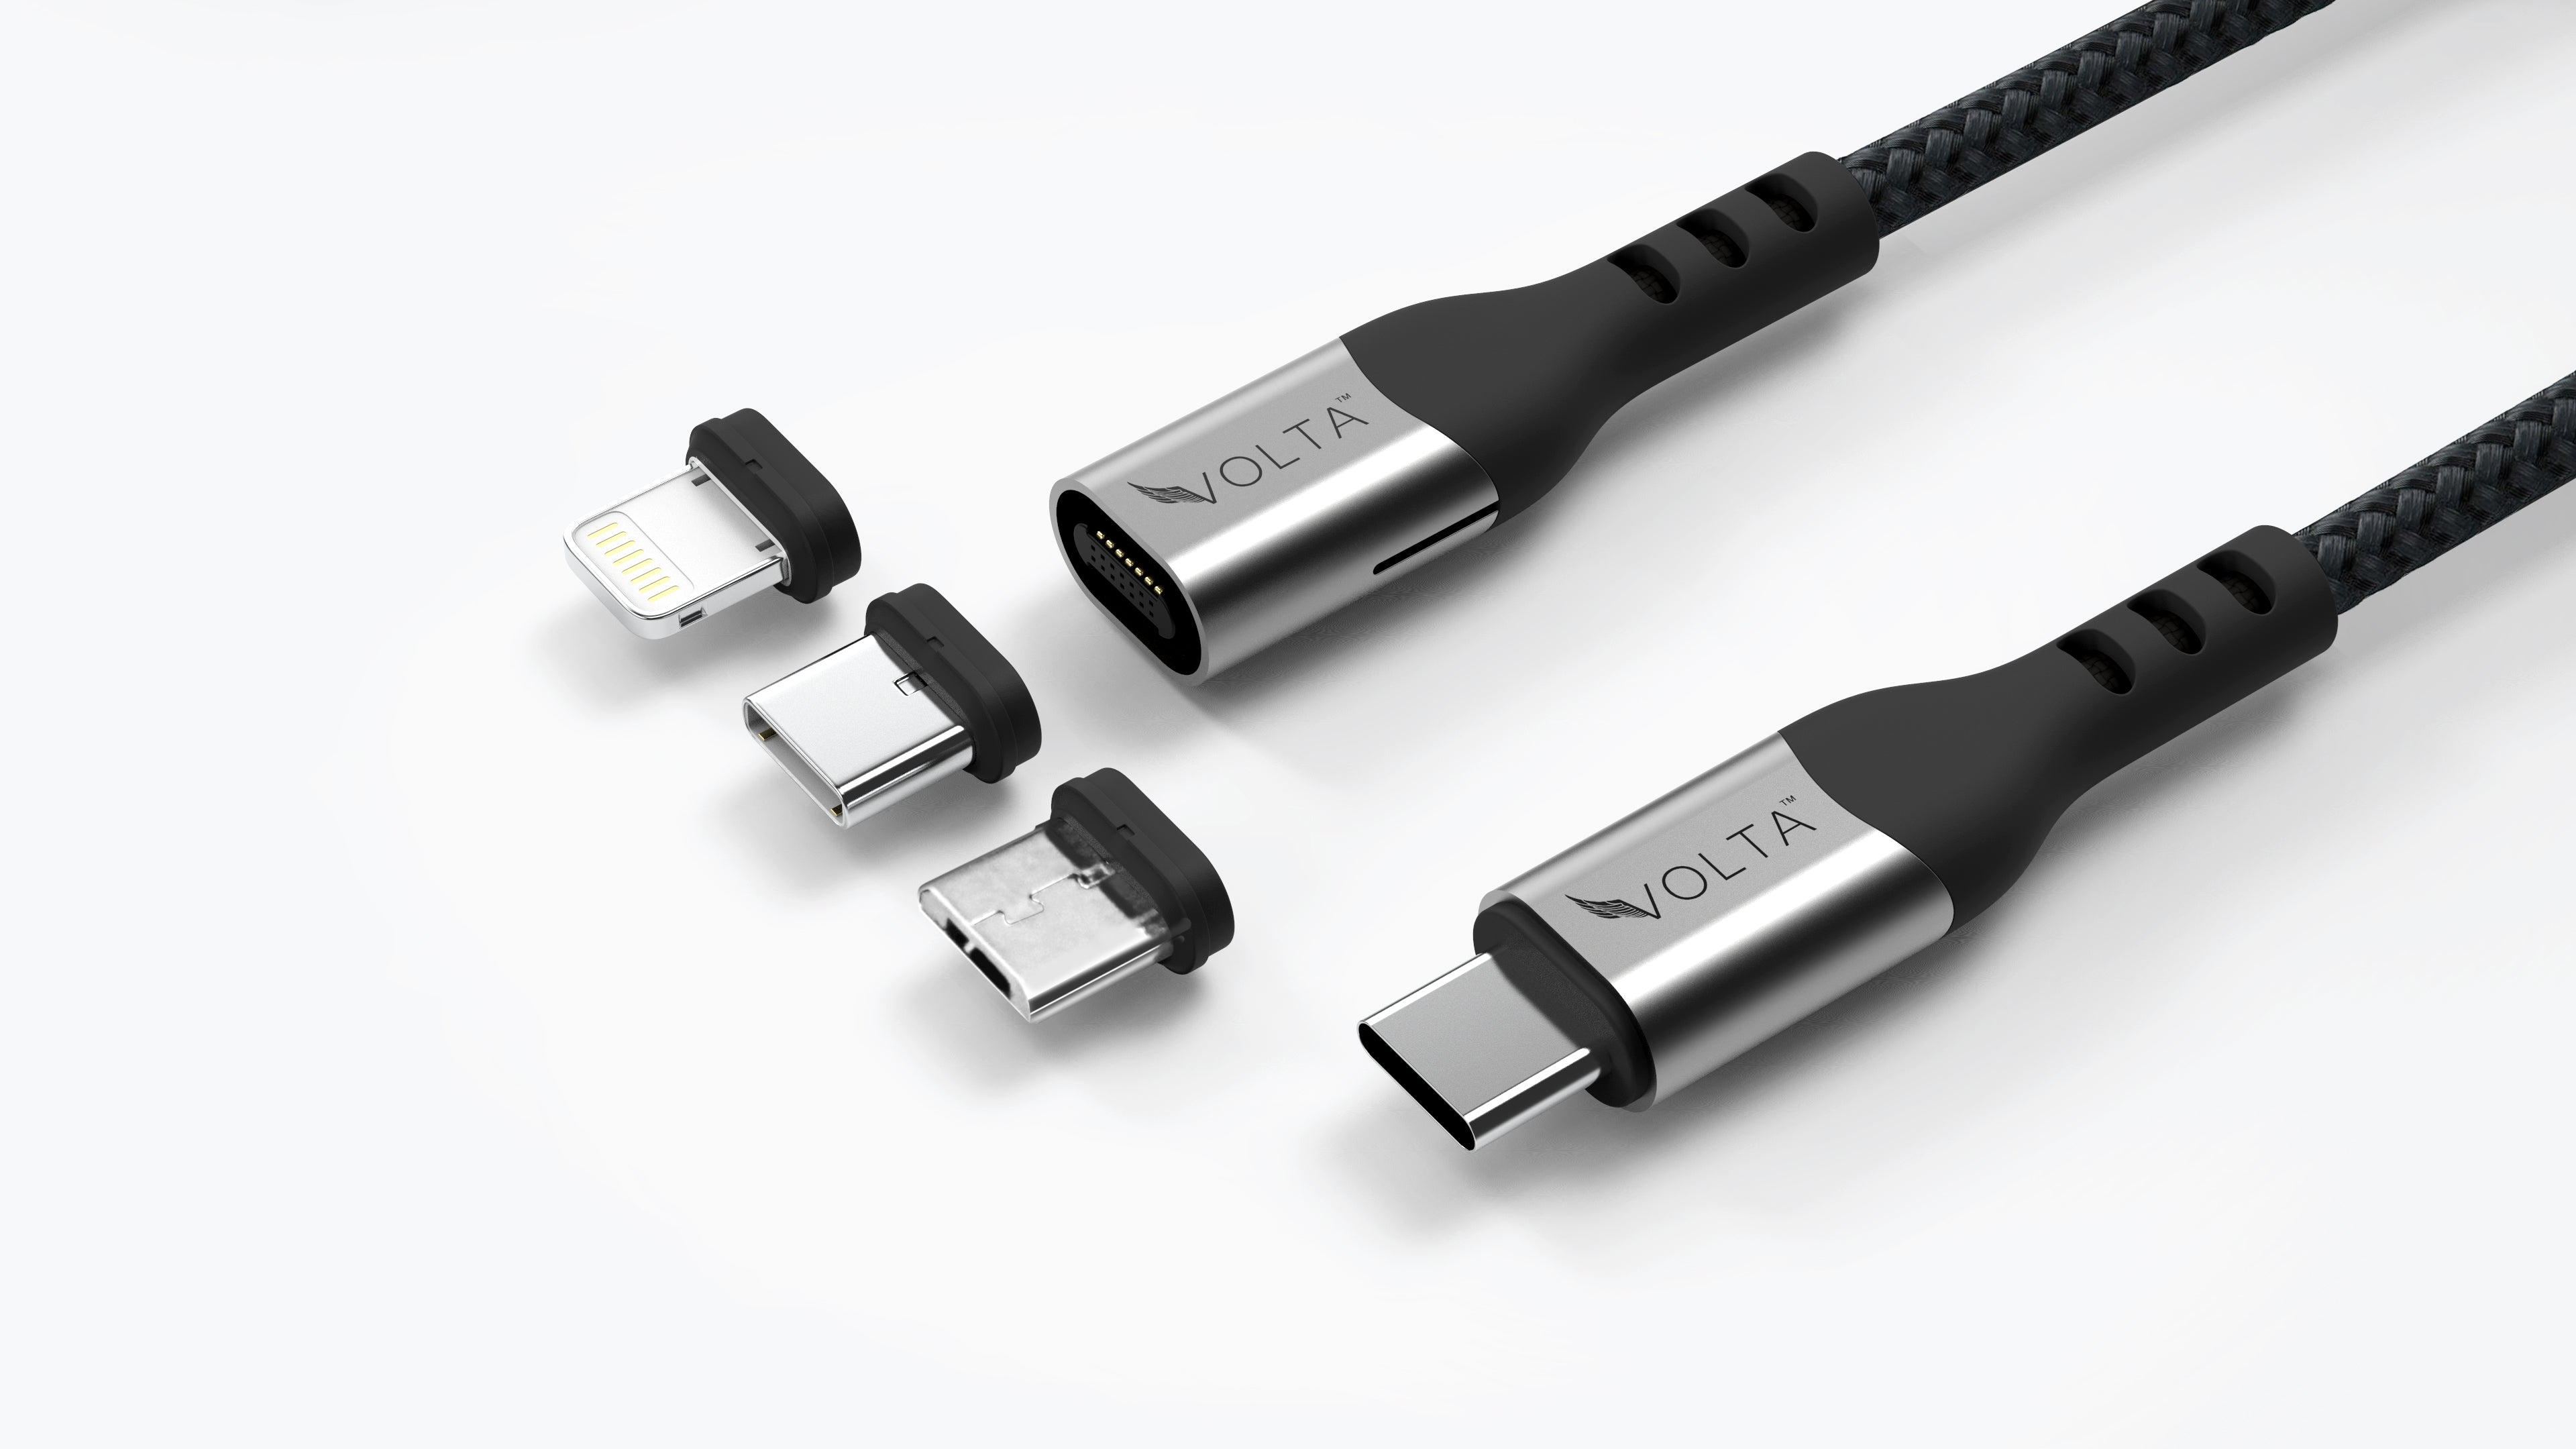 VOLTA Spark - The Only Charging Cable for All Your Devices